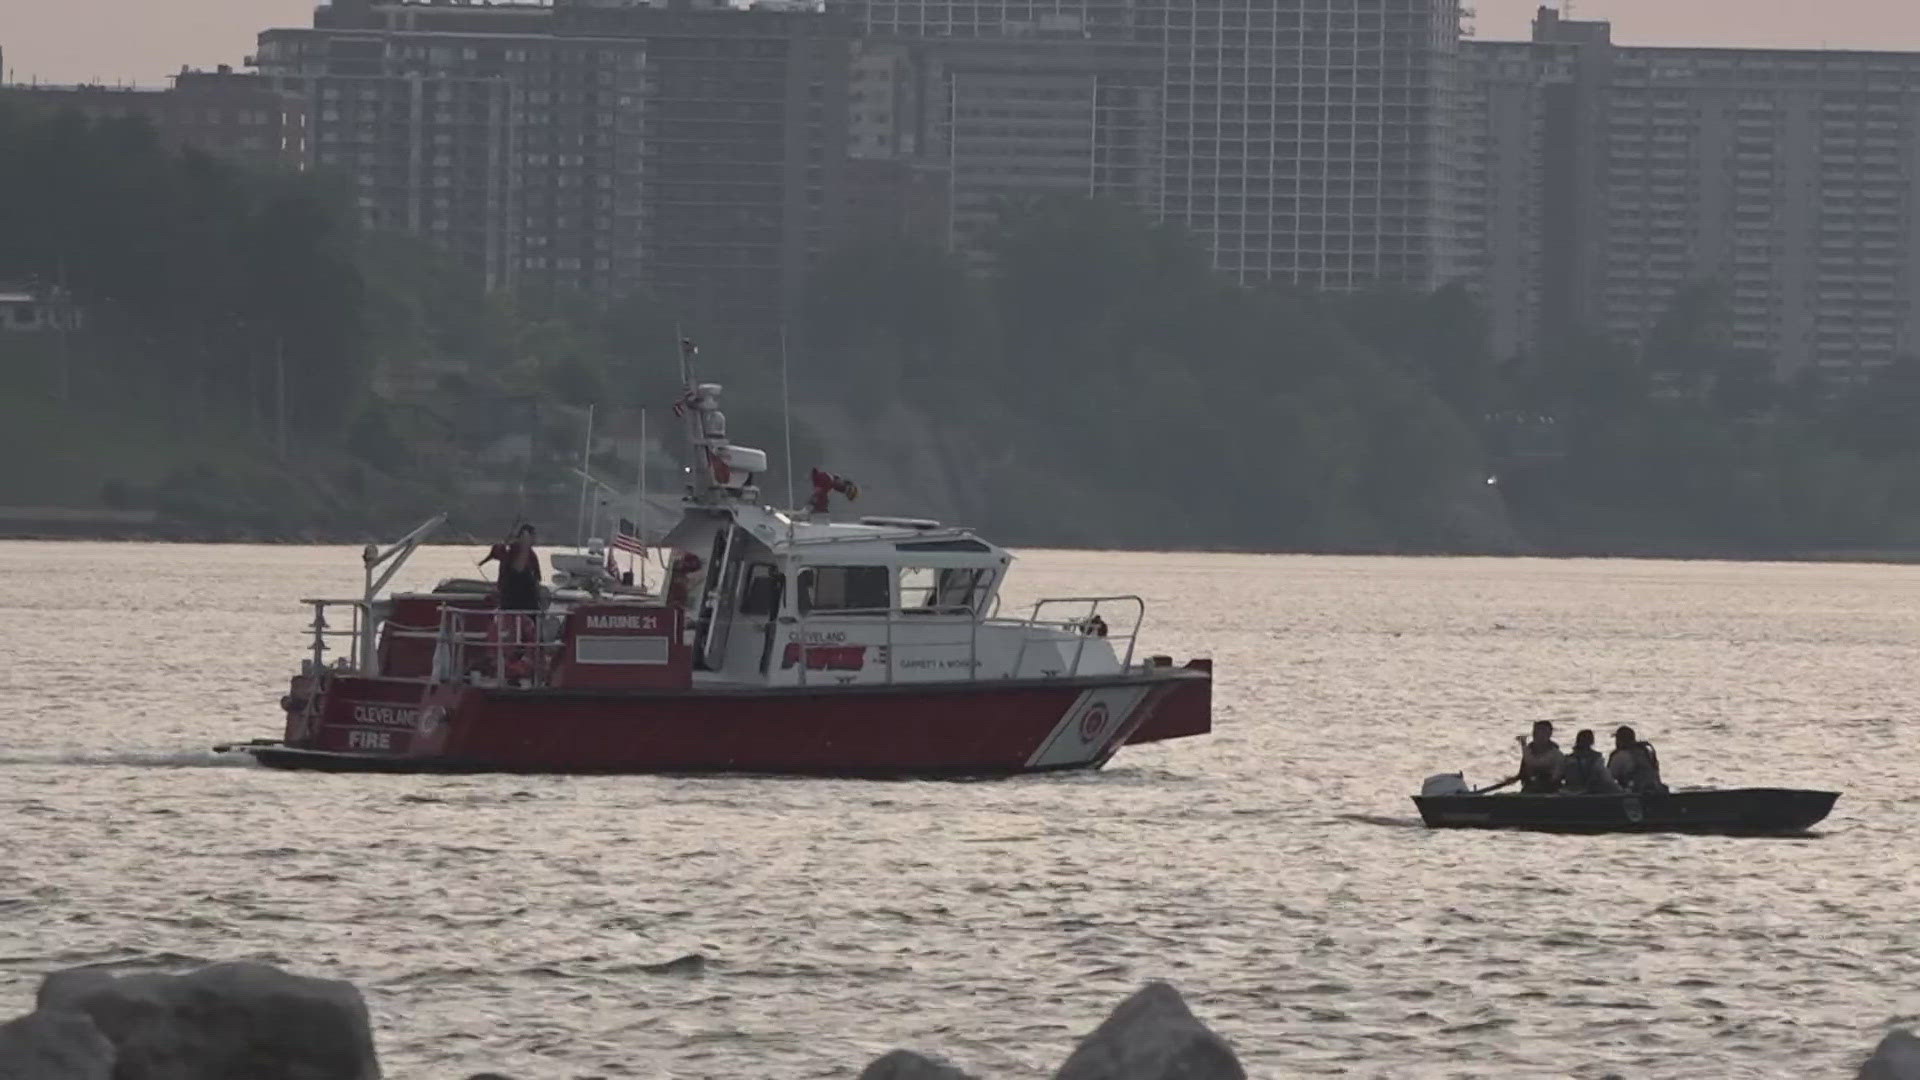 According to officials, the victim went into the water to cool off on a hot day, but could not get back to shore.